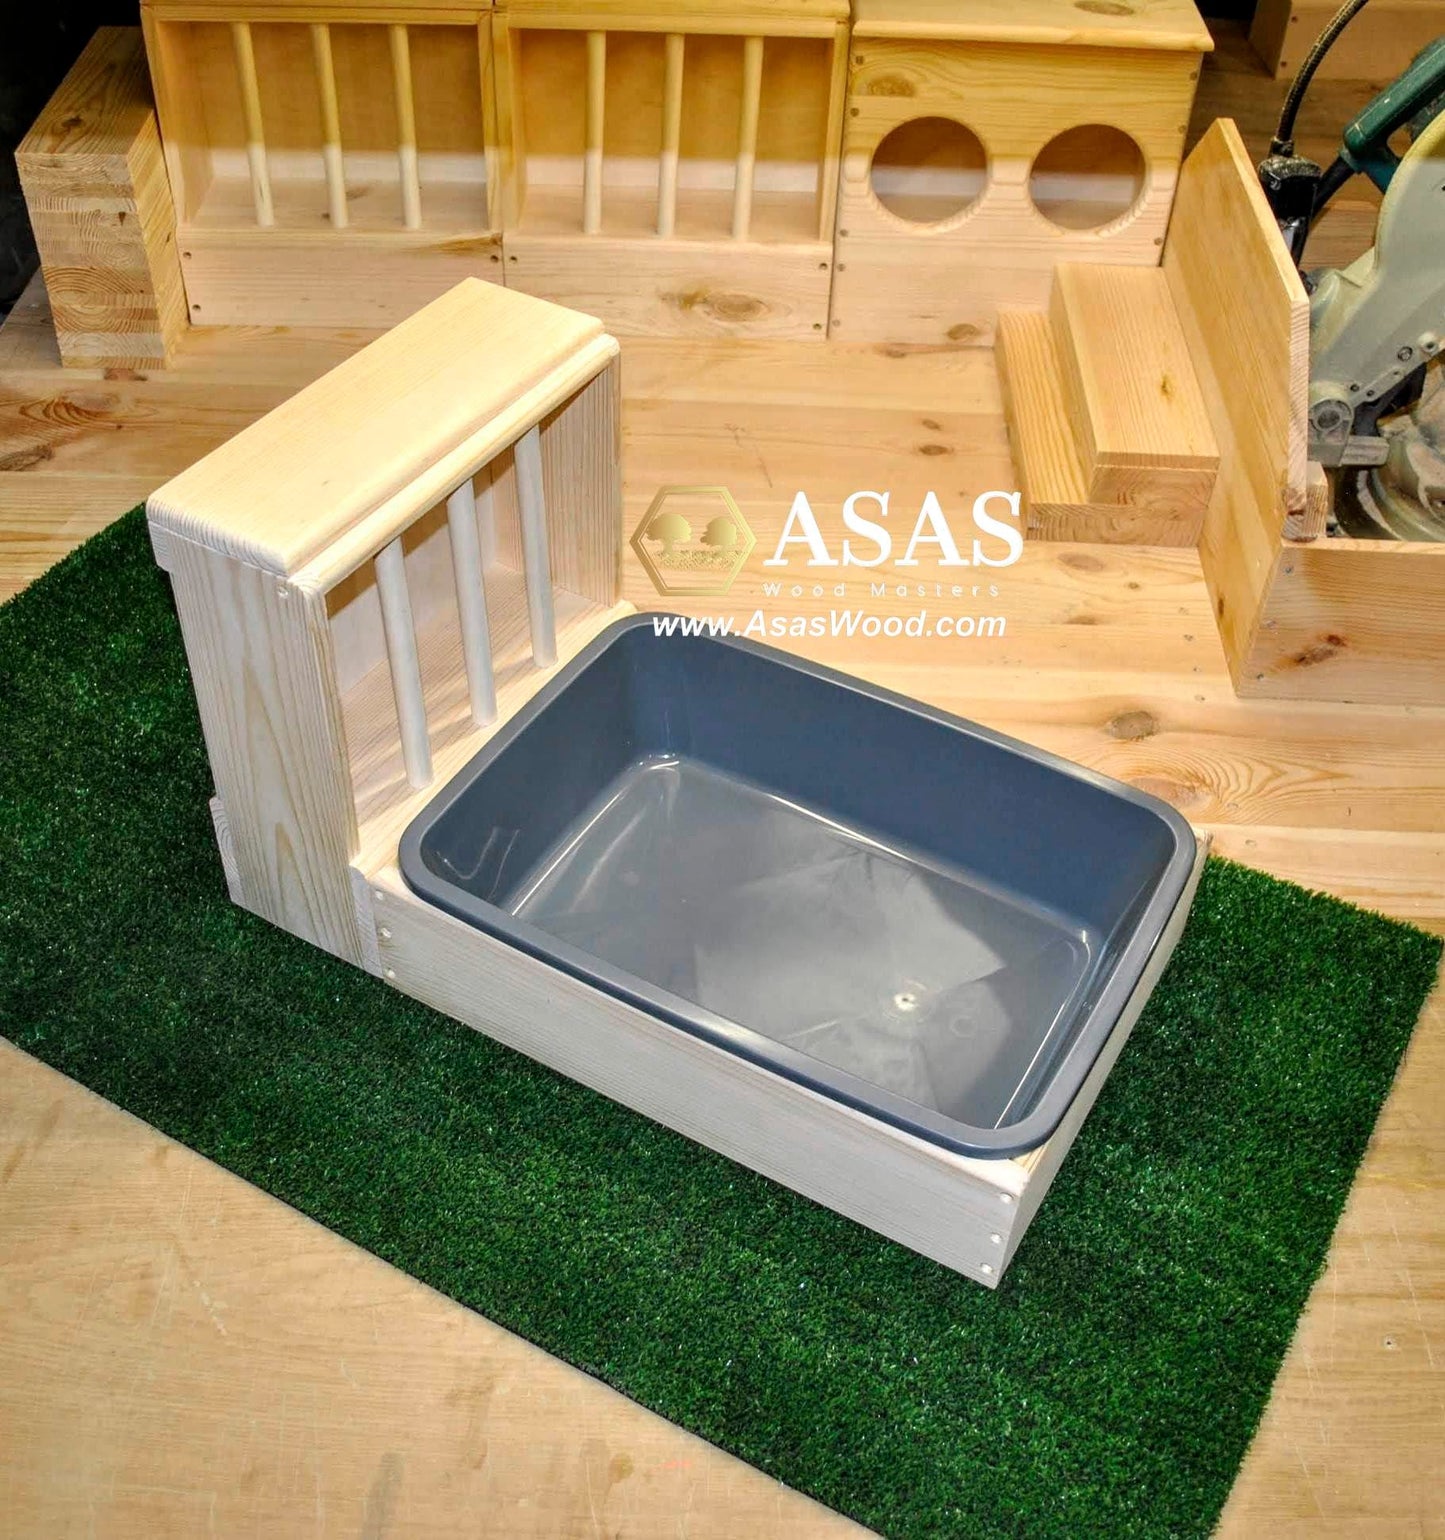 hay feeder for rabbits, made by asaswood